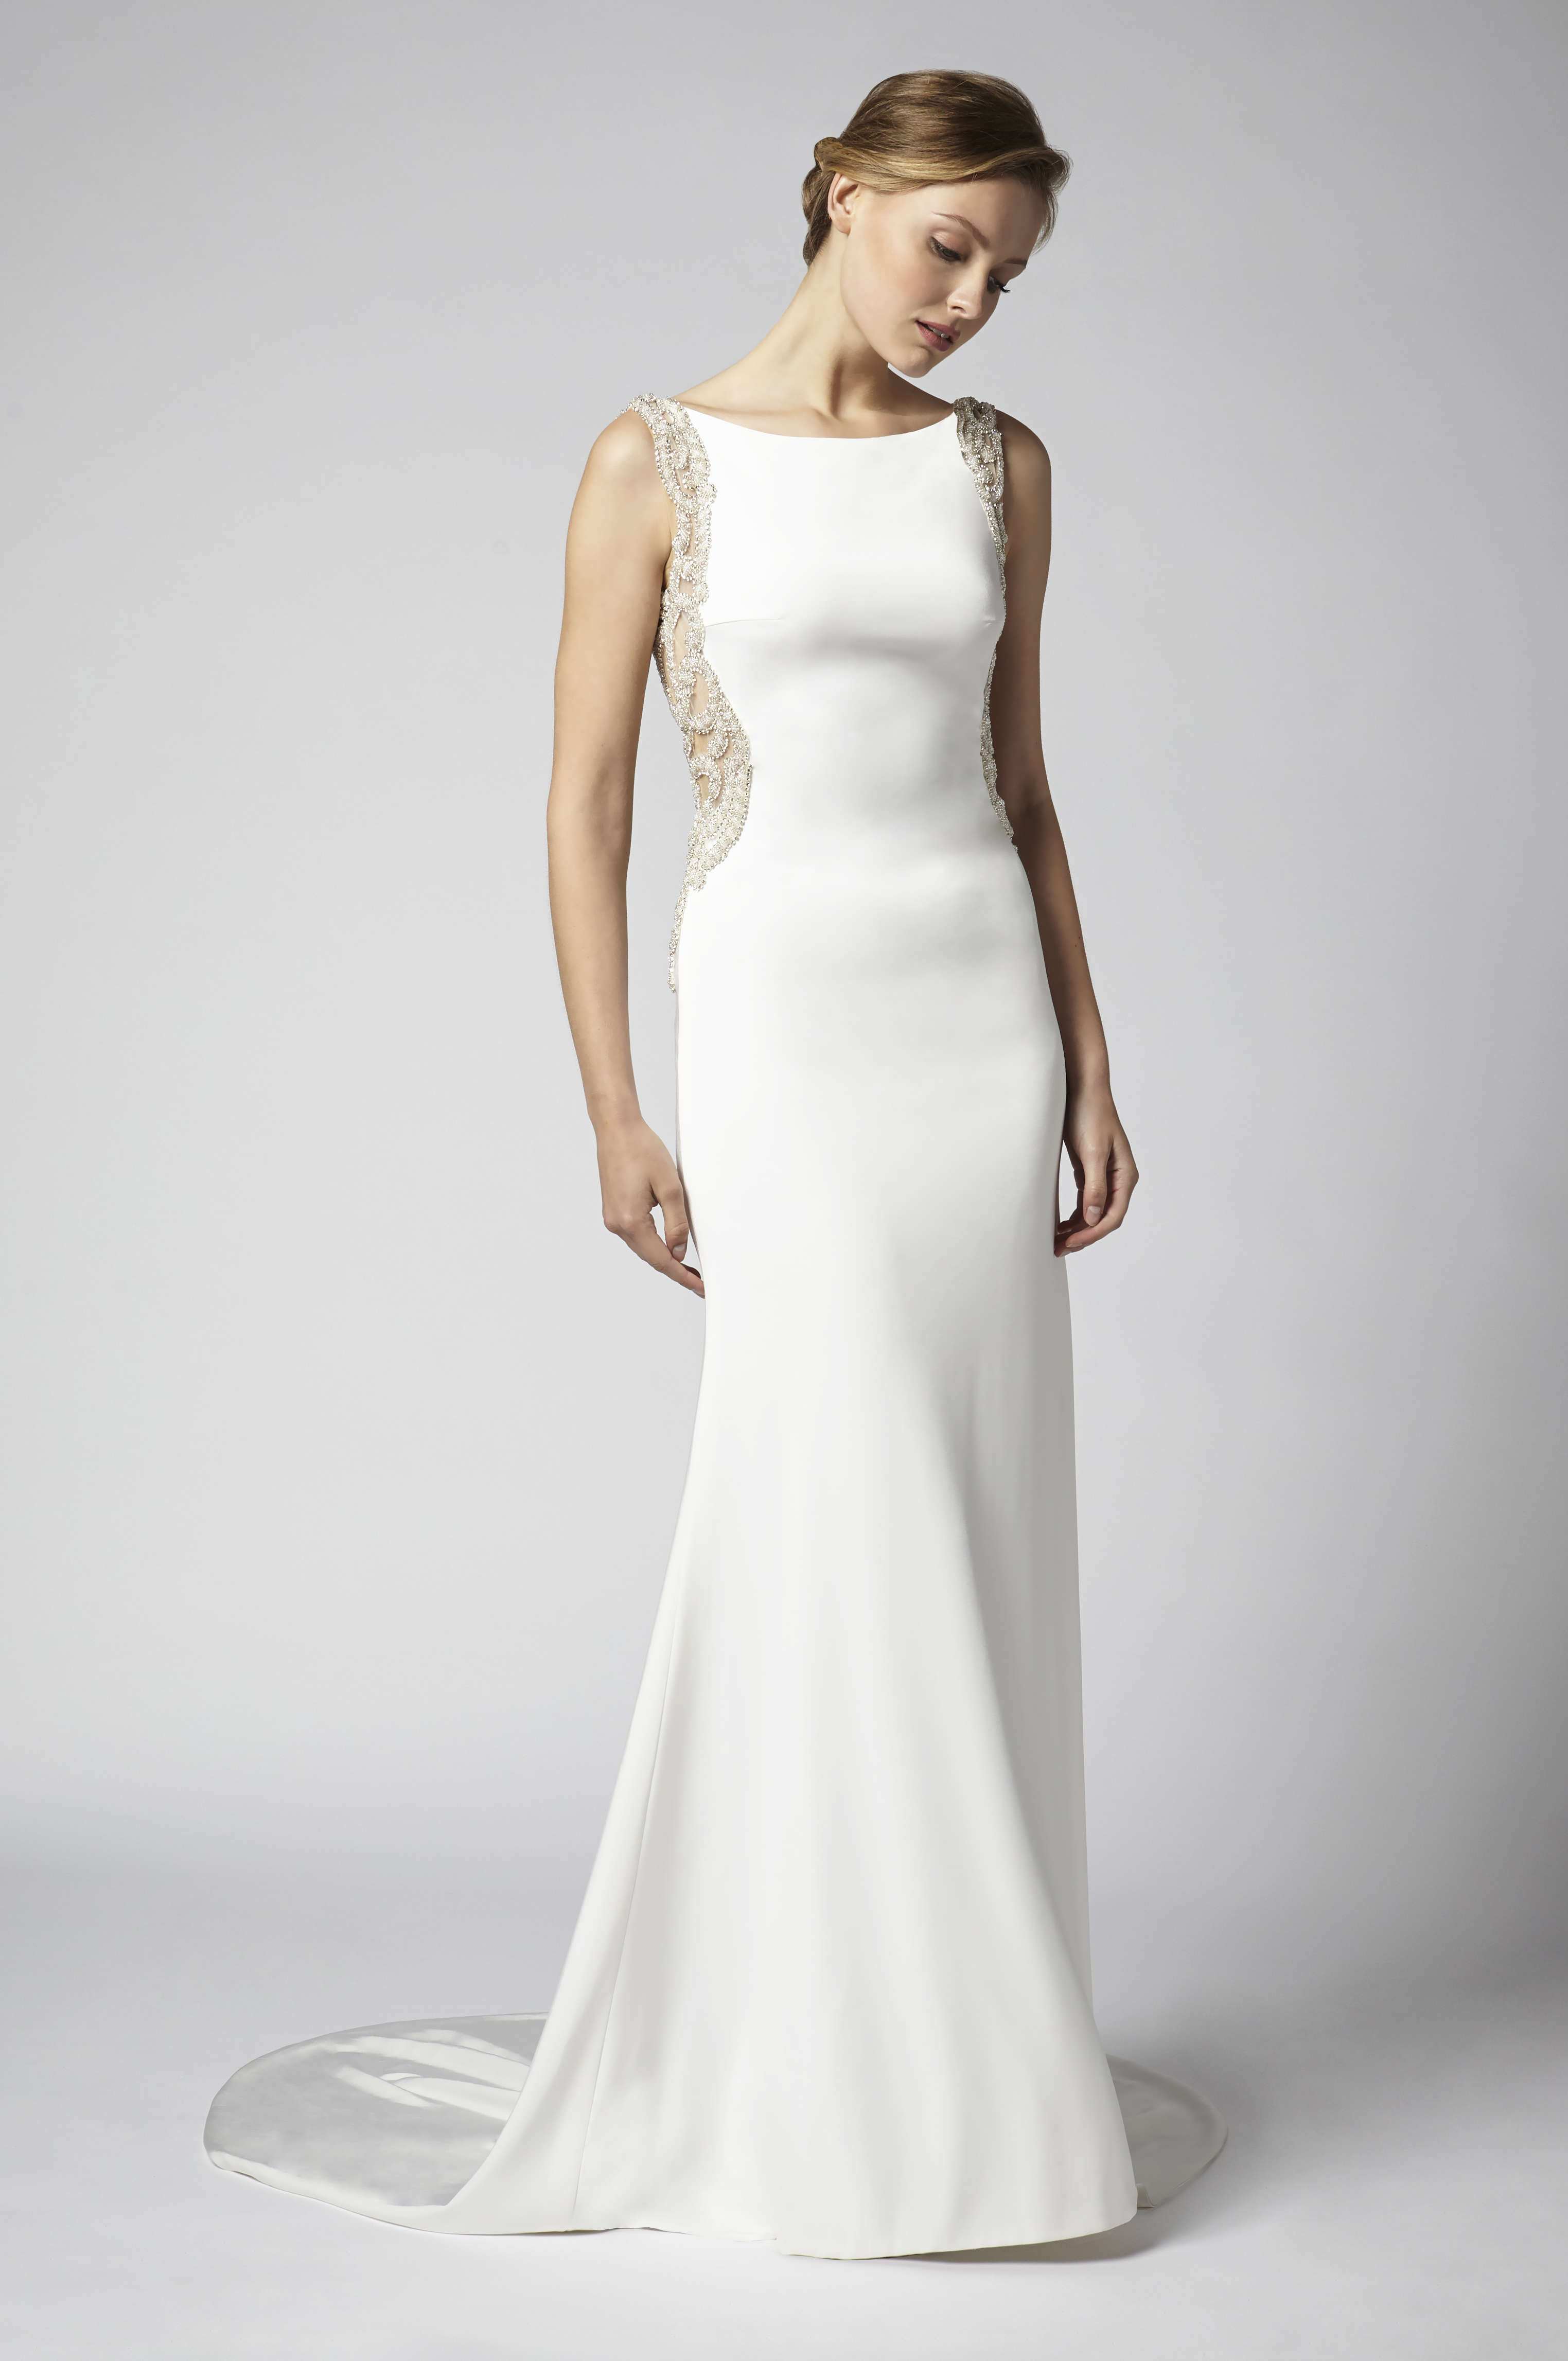 Great Wedding Dress Sheath in the world Don t miss out 